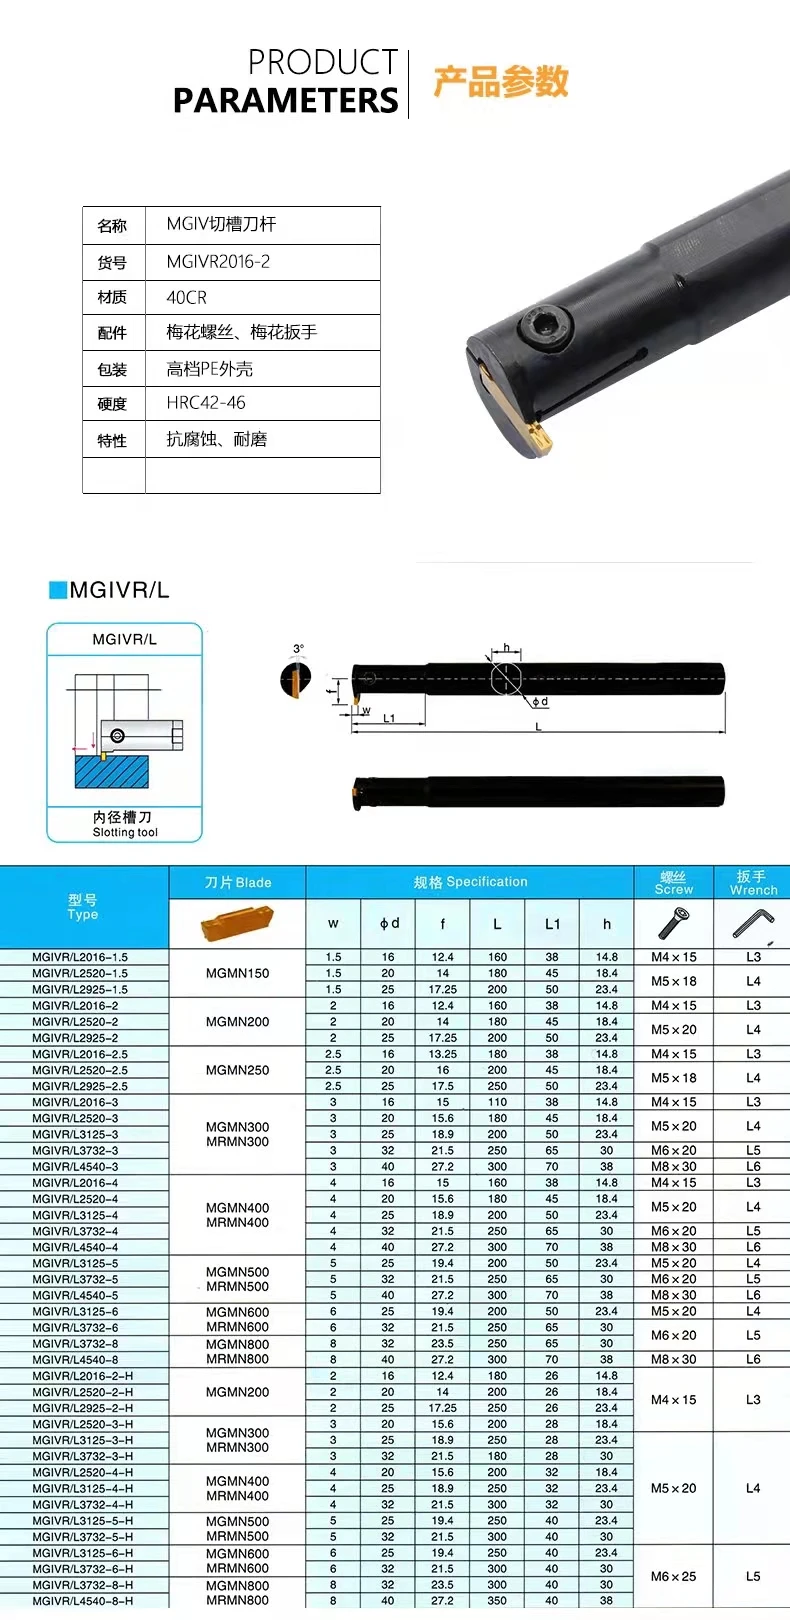 1PCS MGIVR Grooving Tool Holder MGIVR2016 MGIVR2520 MGIVR3125 MGIVR3732-1.5/2/2.5/3/4 MGMN Carbide Inserts Internal Turning Tool woodruff cutters